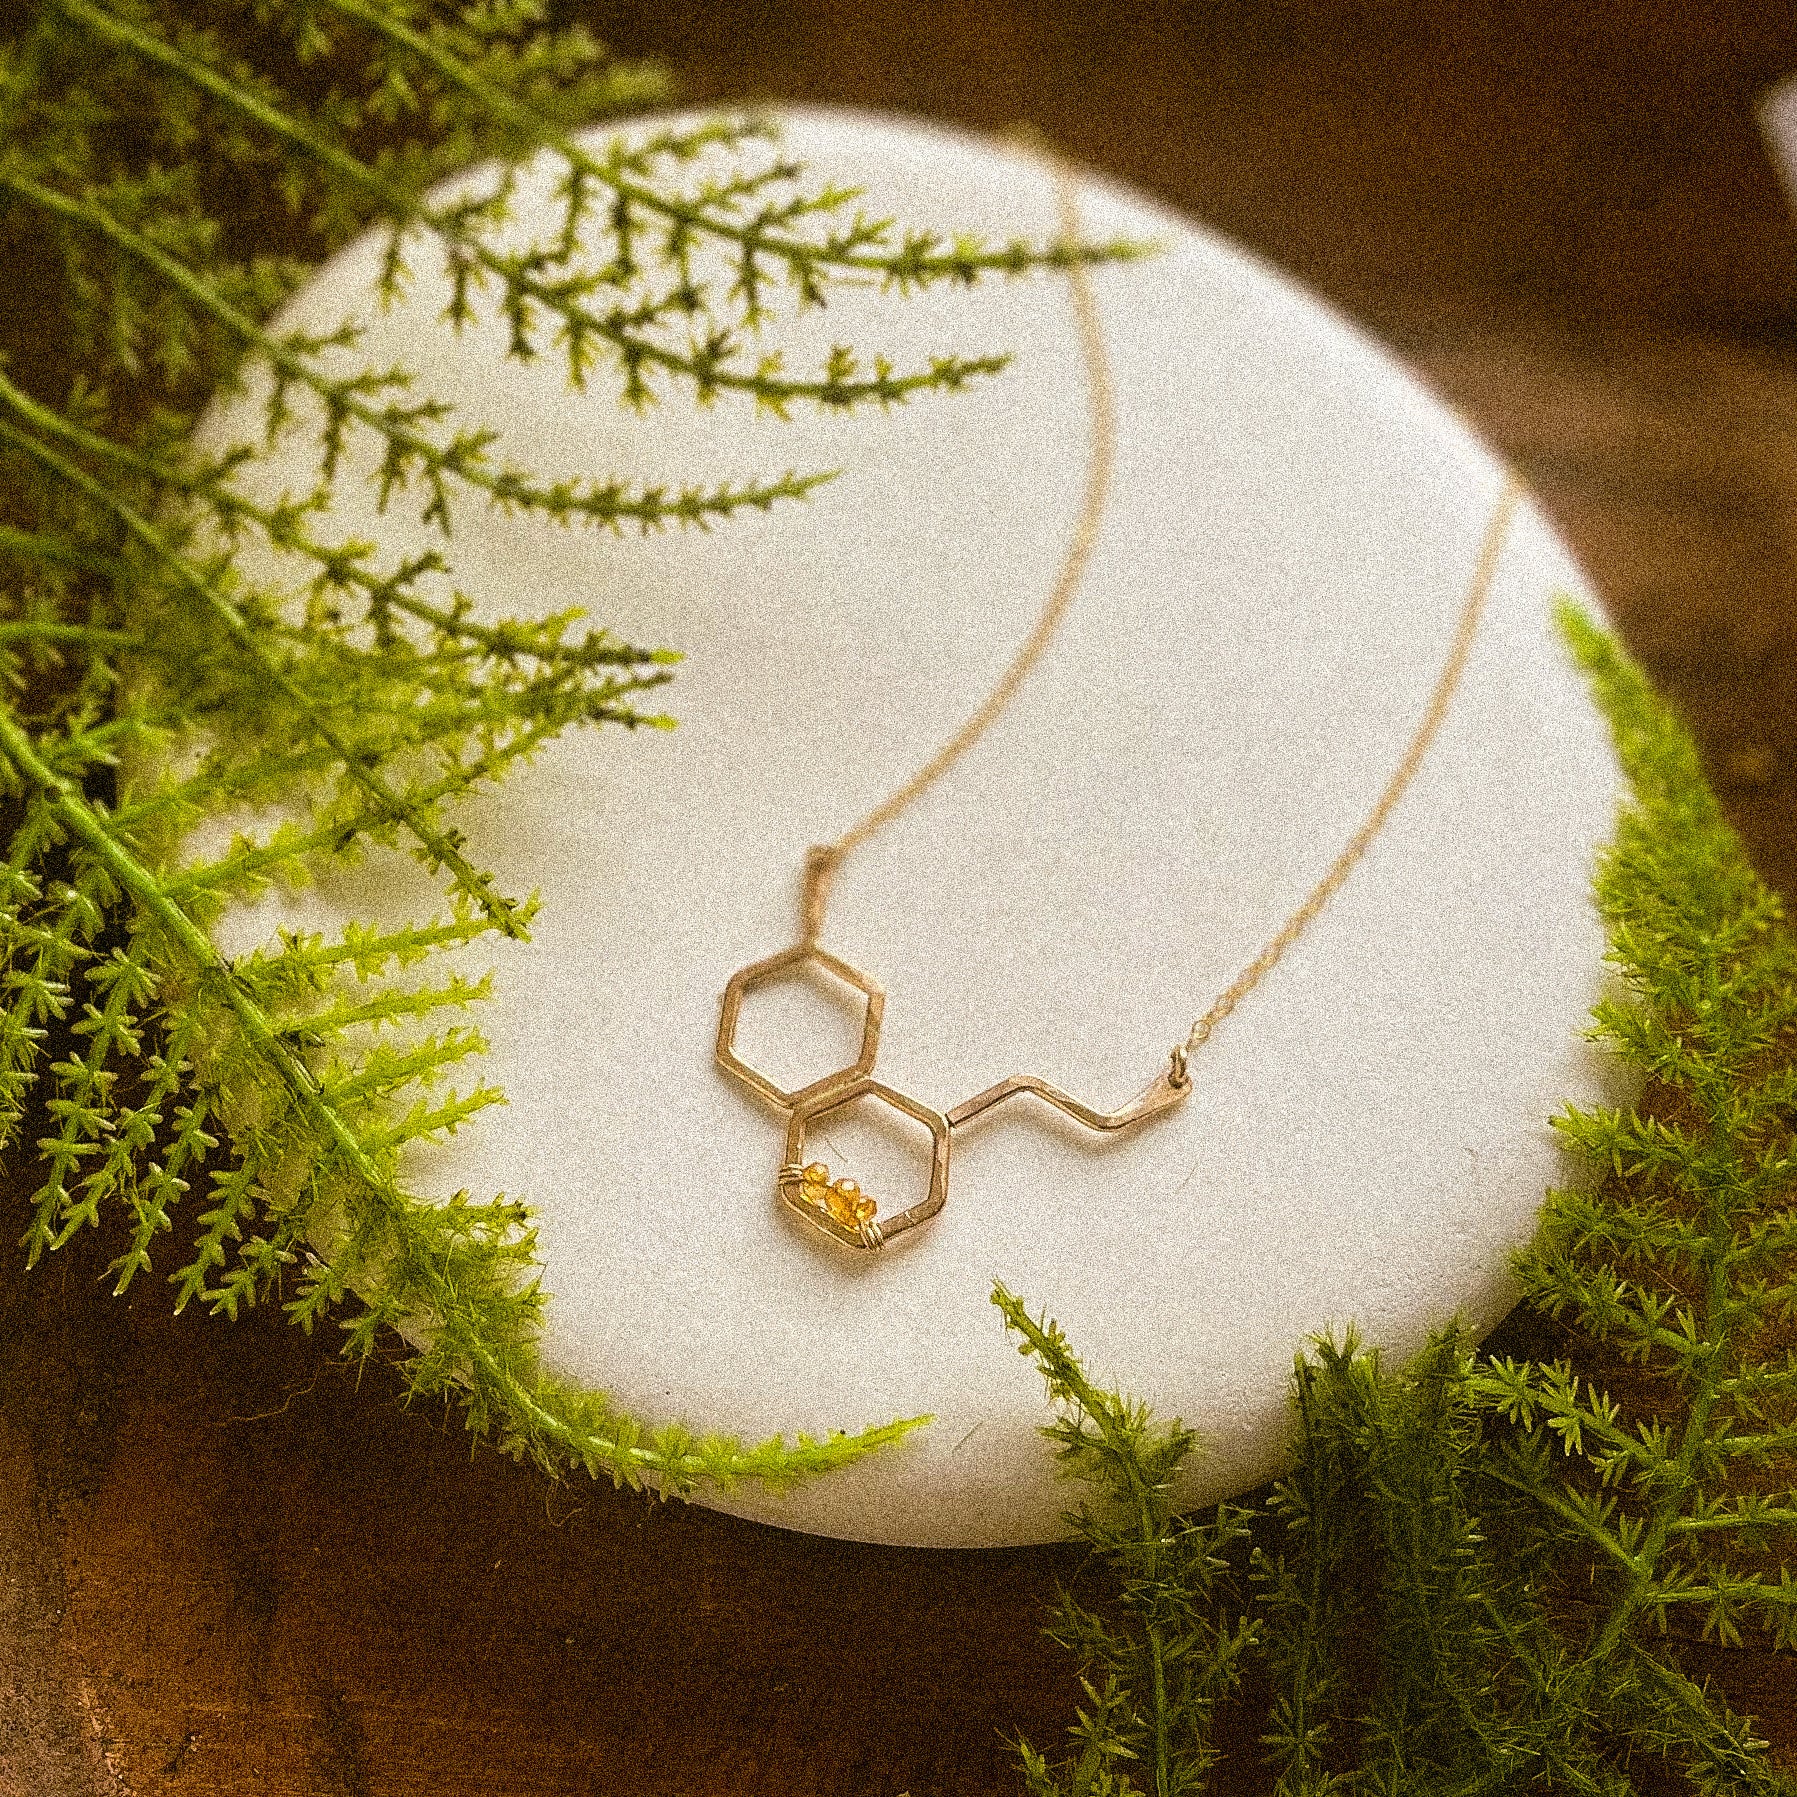 Hive Necklace